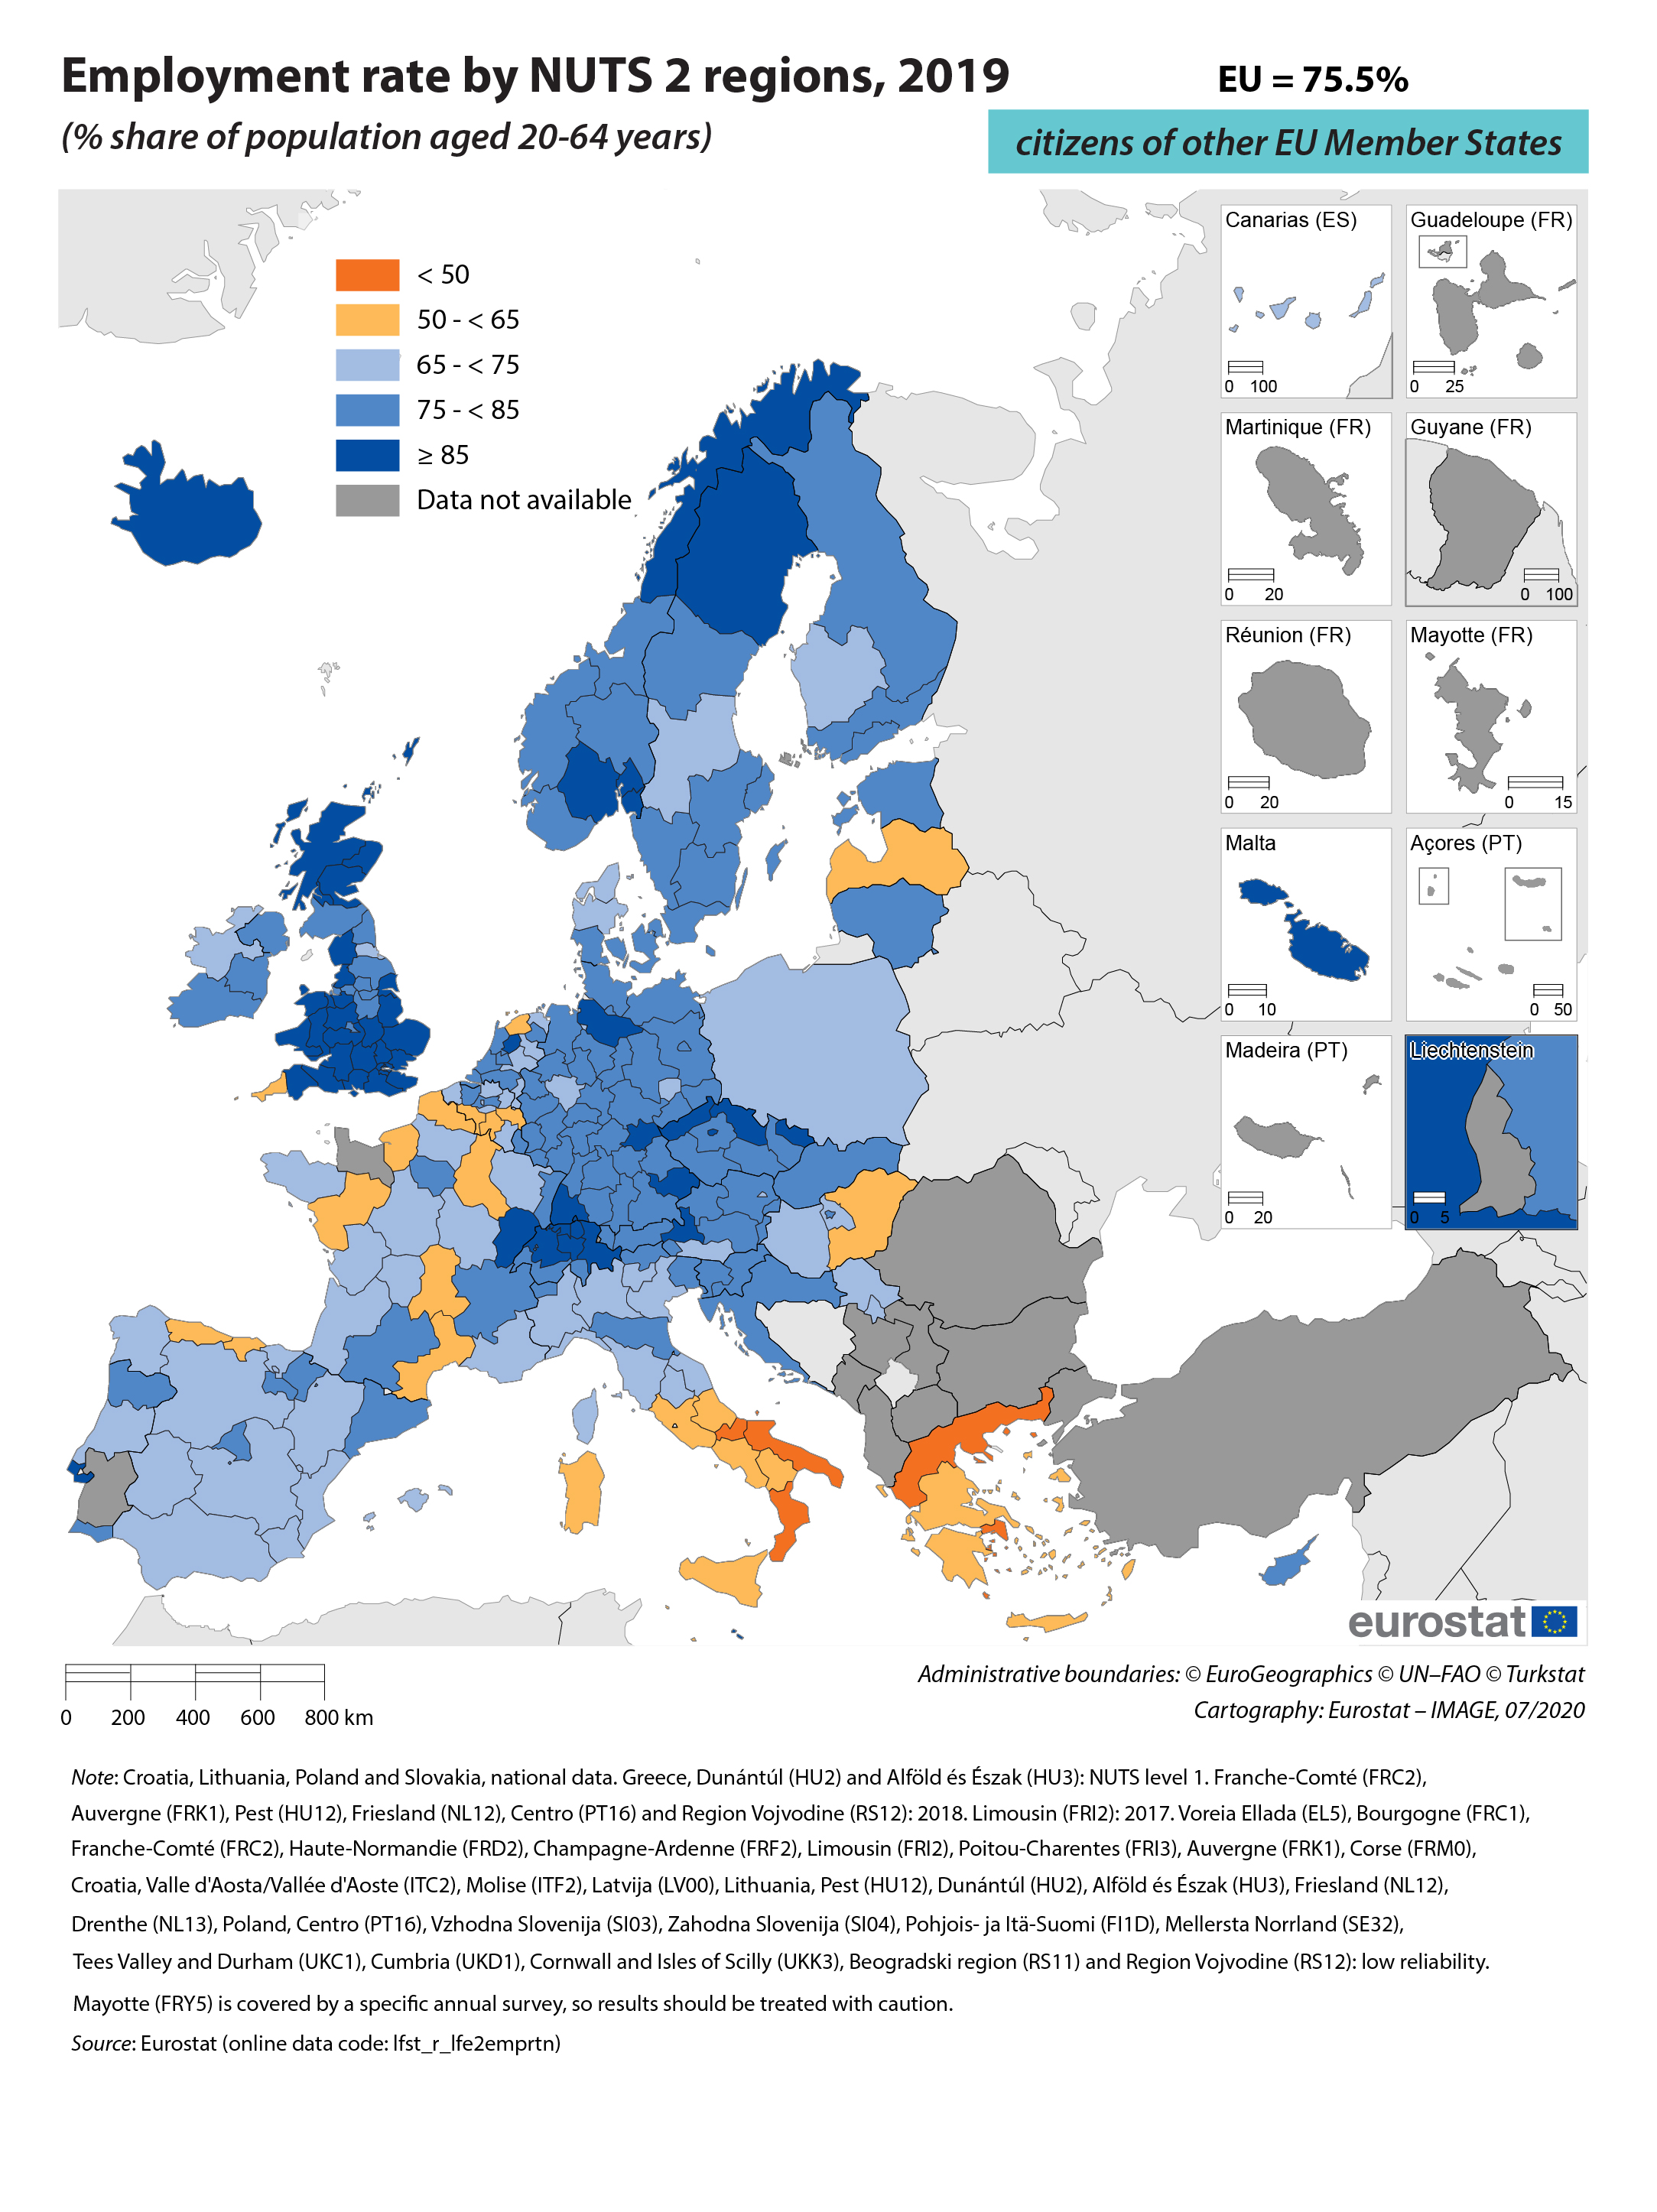 Employment rate by NUTS 2 regions, 2019 - citizens of other EU Member States